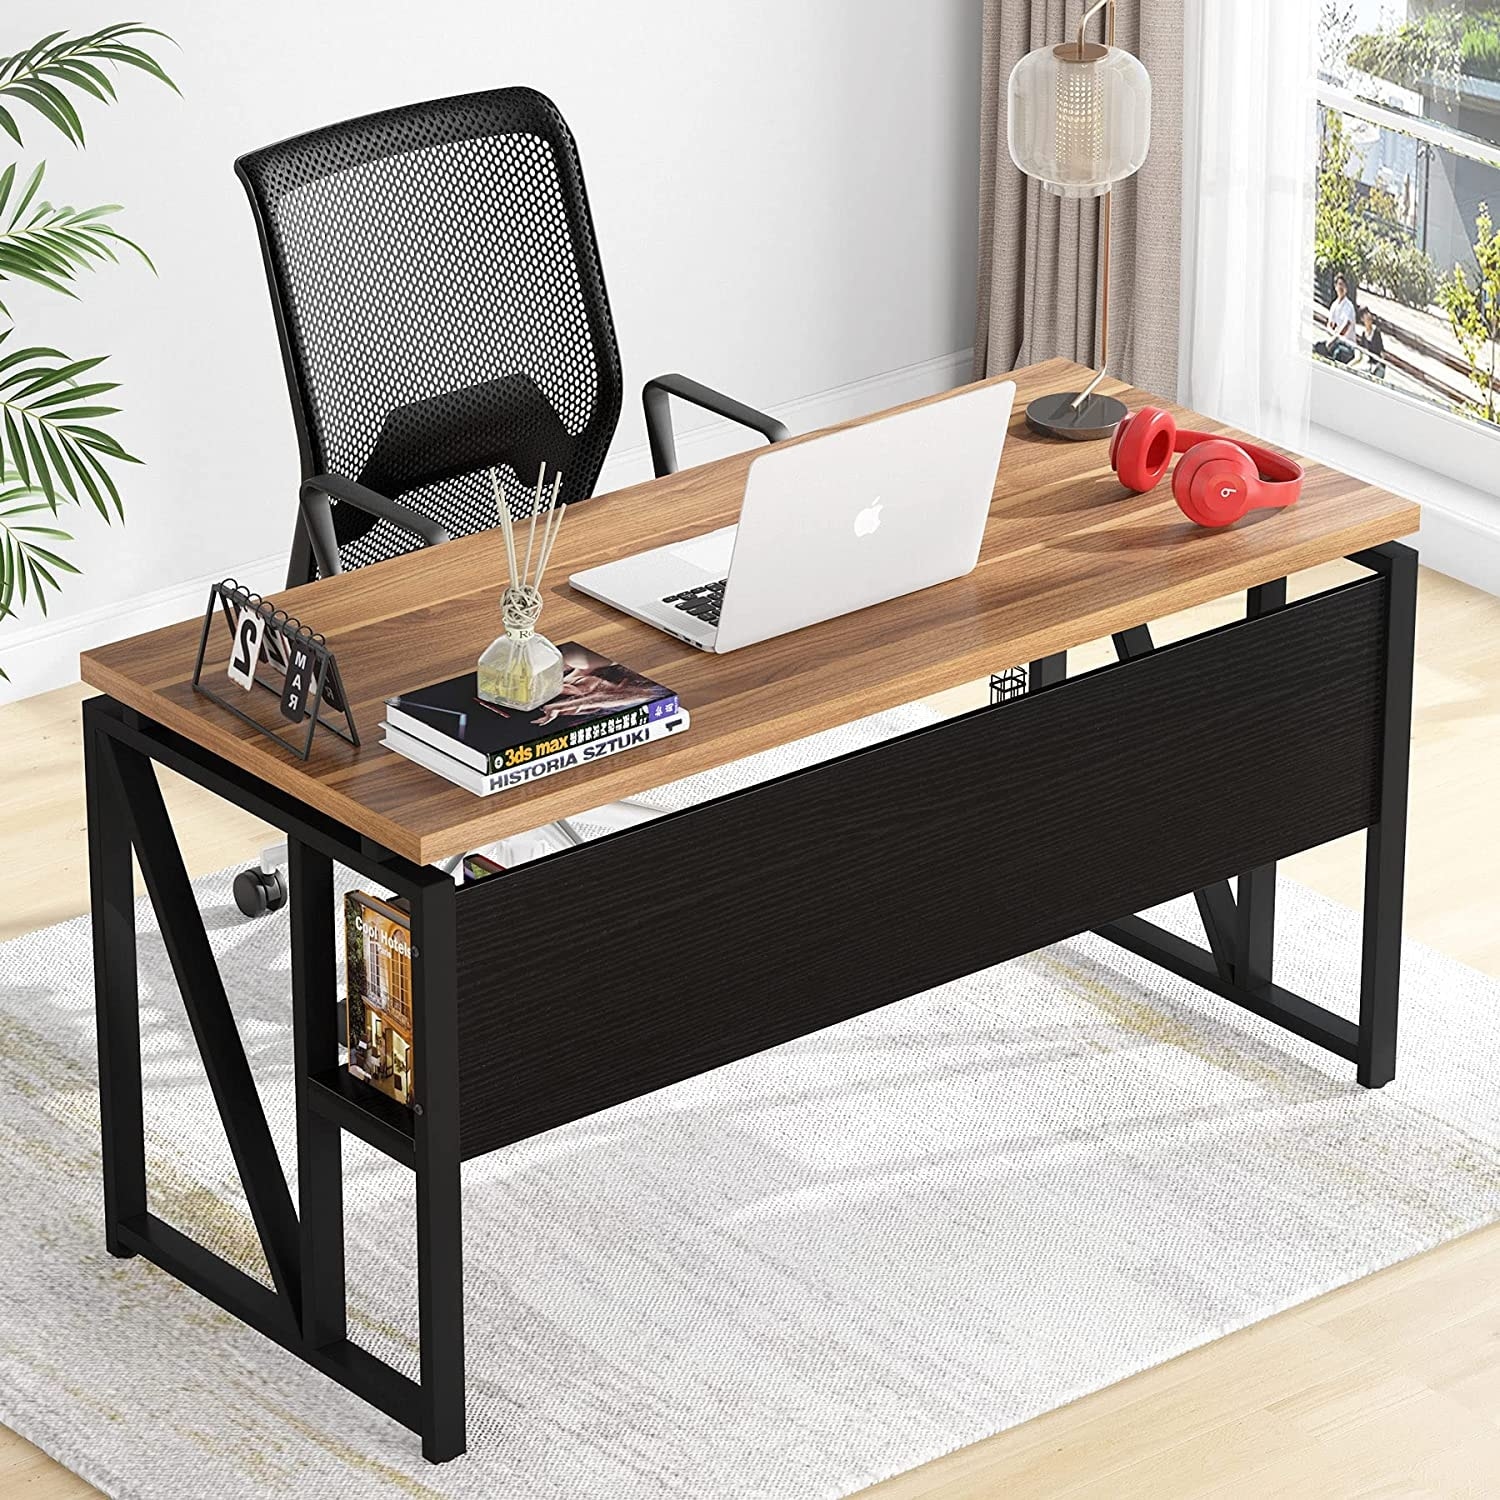 https://ak1.ostkcdn.com/images/products/is/images/direct/e91b334d67dcf03df7574e864bb40b46315617a2/L-Shaped-Desk-with-Drawer%2C-Executive-Desk-and-lateral-File-Cabinet%2C-2-Piece-Home-Office-Furniture-with-shel.jpg